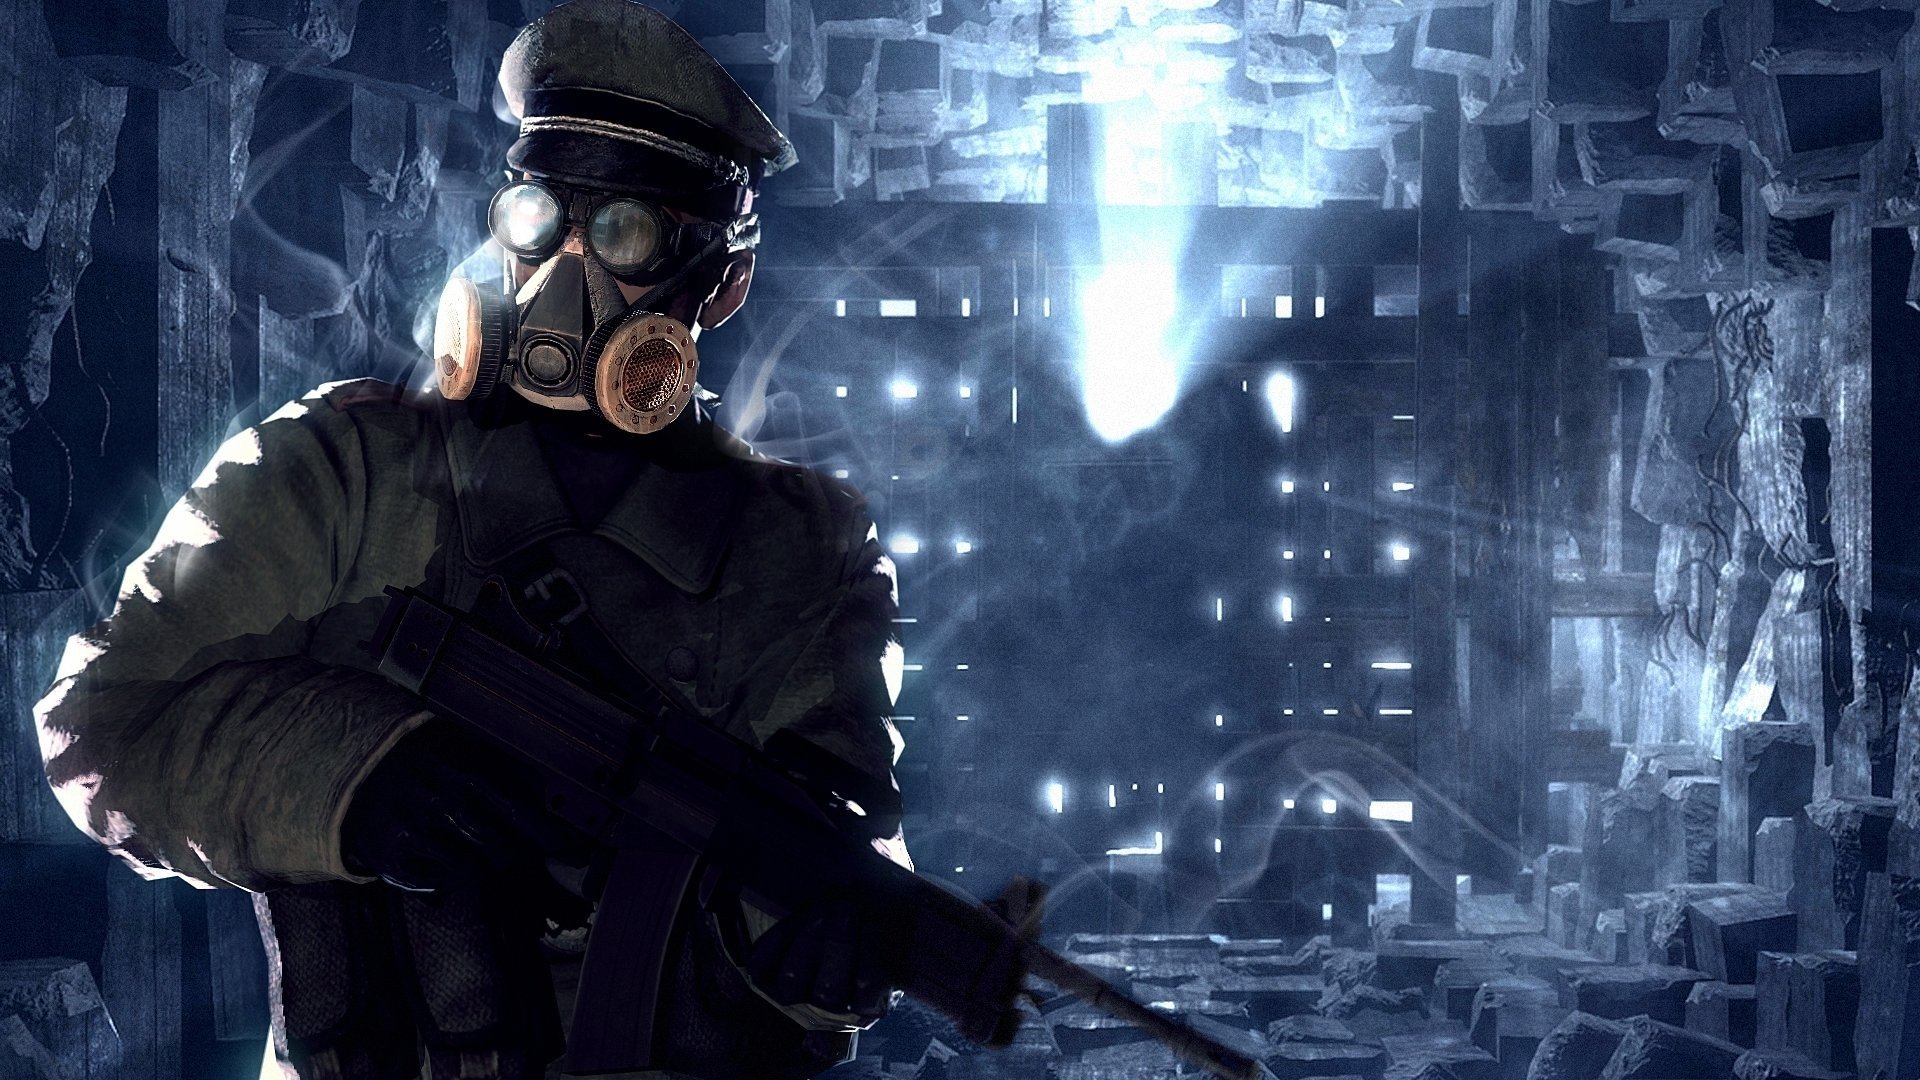 soldier, Apocalyptic, Gas masks, Romantically Apocalyptic Wallpaper